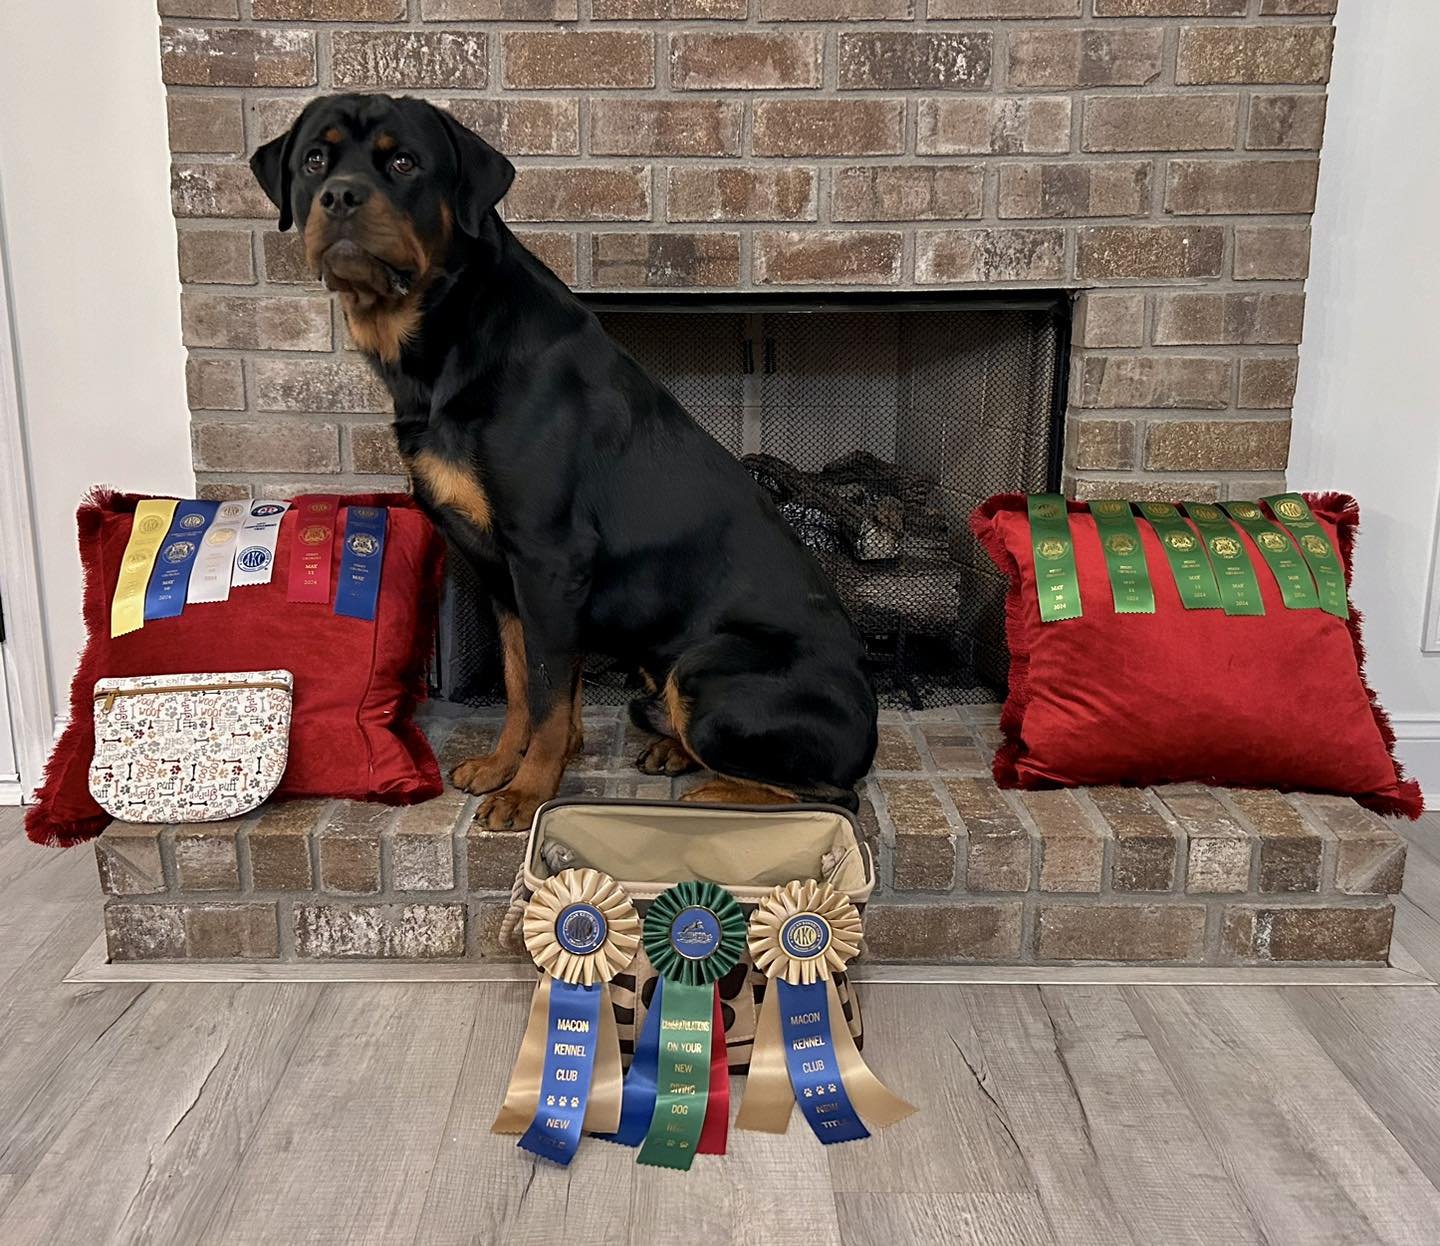 Weekend wrap up!!! 
Lukas had an amazing weekend!!🔥

2- 1st Place in Obedience 🥇🥇
1 - 2nd Place in Obedience 🥈
Earning his CD Title! 

Rally 3 Q&rsquo;s (3rd and 4th place respectively) Earning his RN Title! 

Personal Best of 18&rsquo;3&rdquo; i